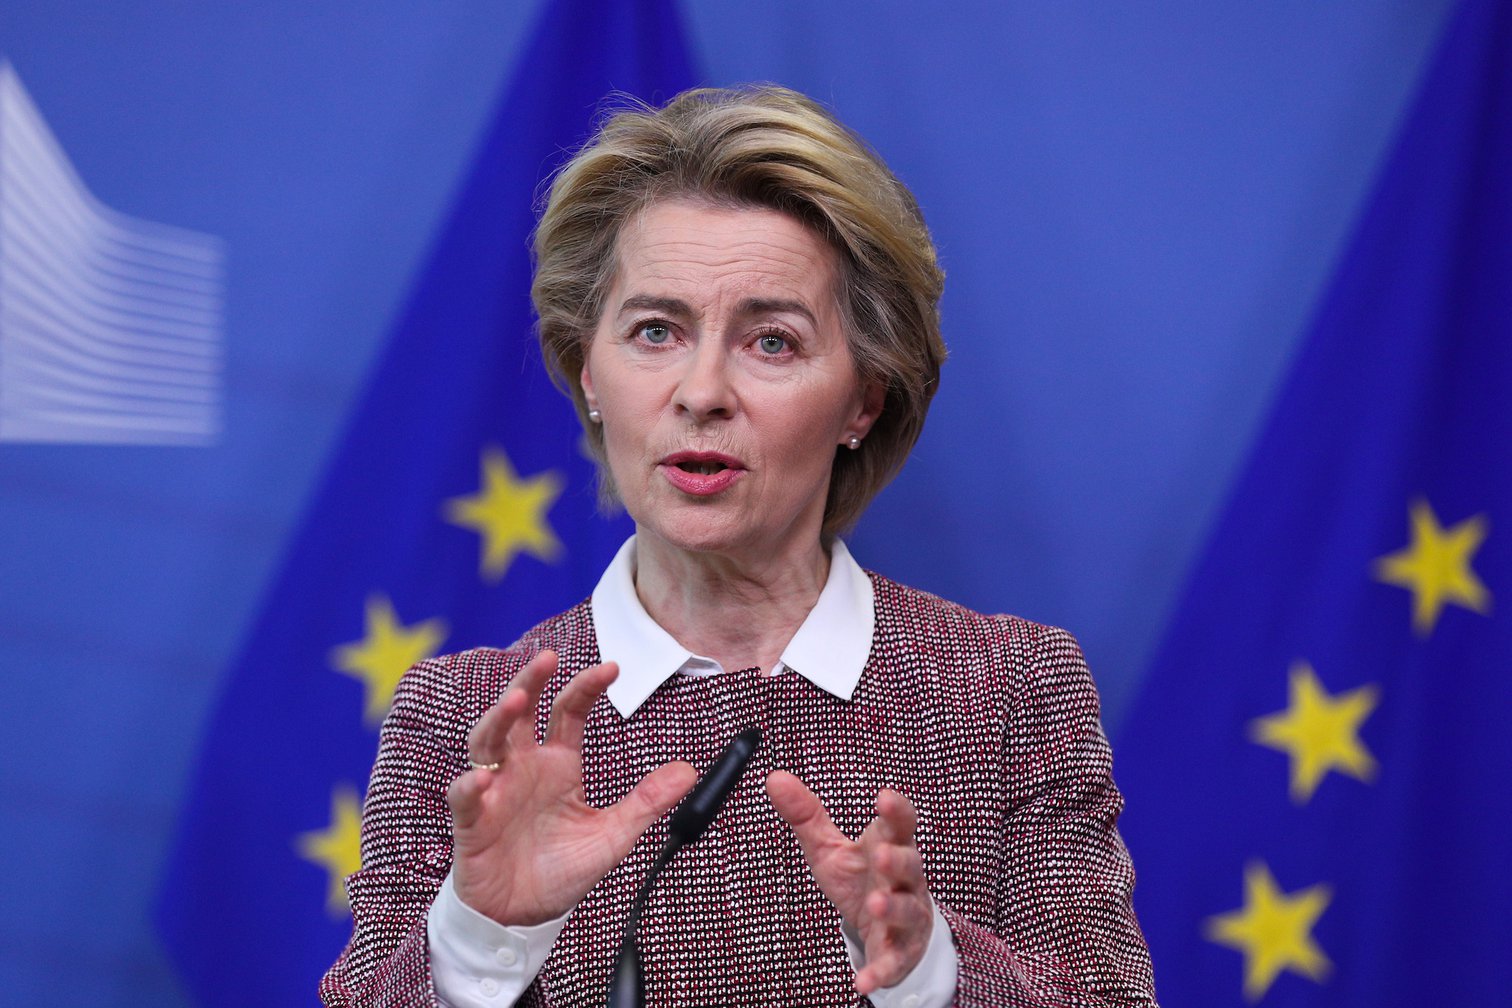 The EU is in trouble and Ursula Von der Leyen is the wrong person to